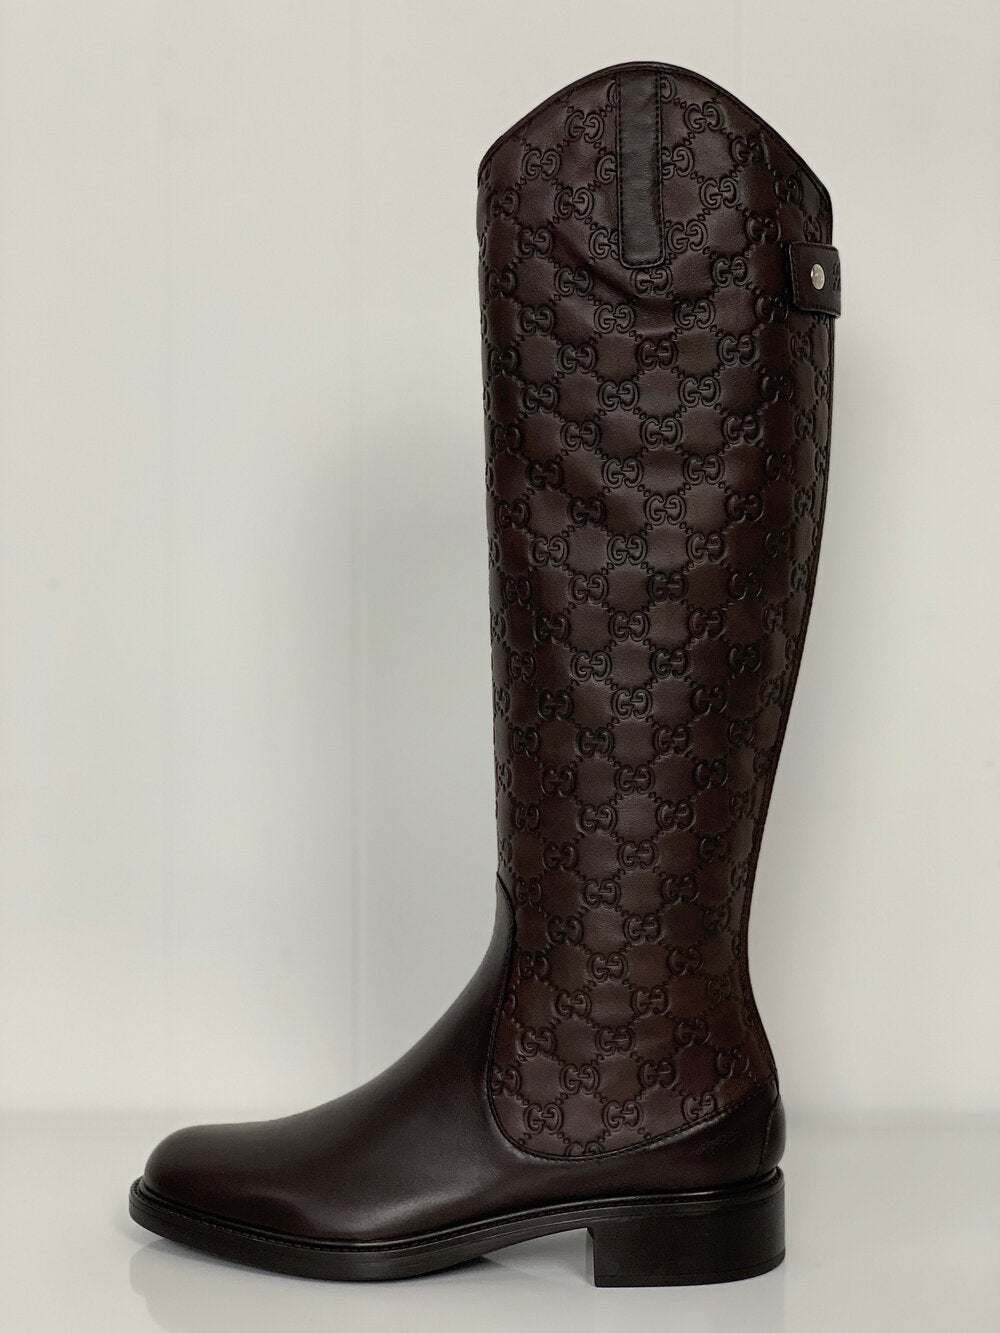 Gucci GG Maud Brown Leather Riding Boot